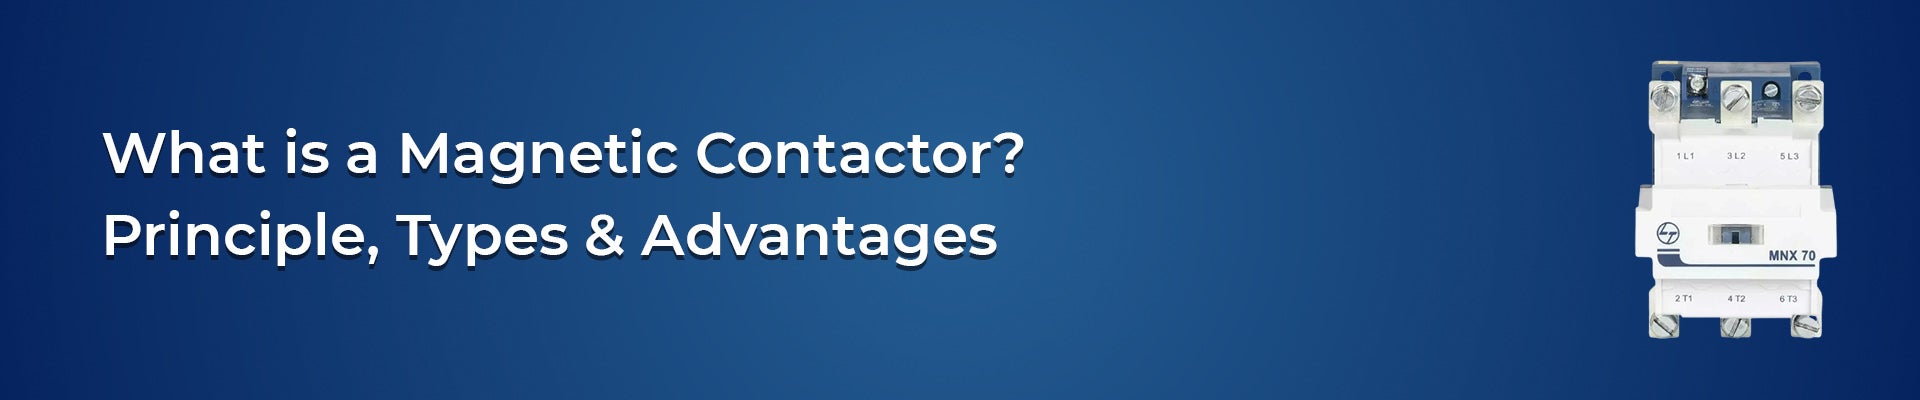 What is a Magnetic Contactor? Principle, Types & Advantages